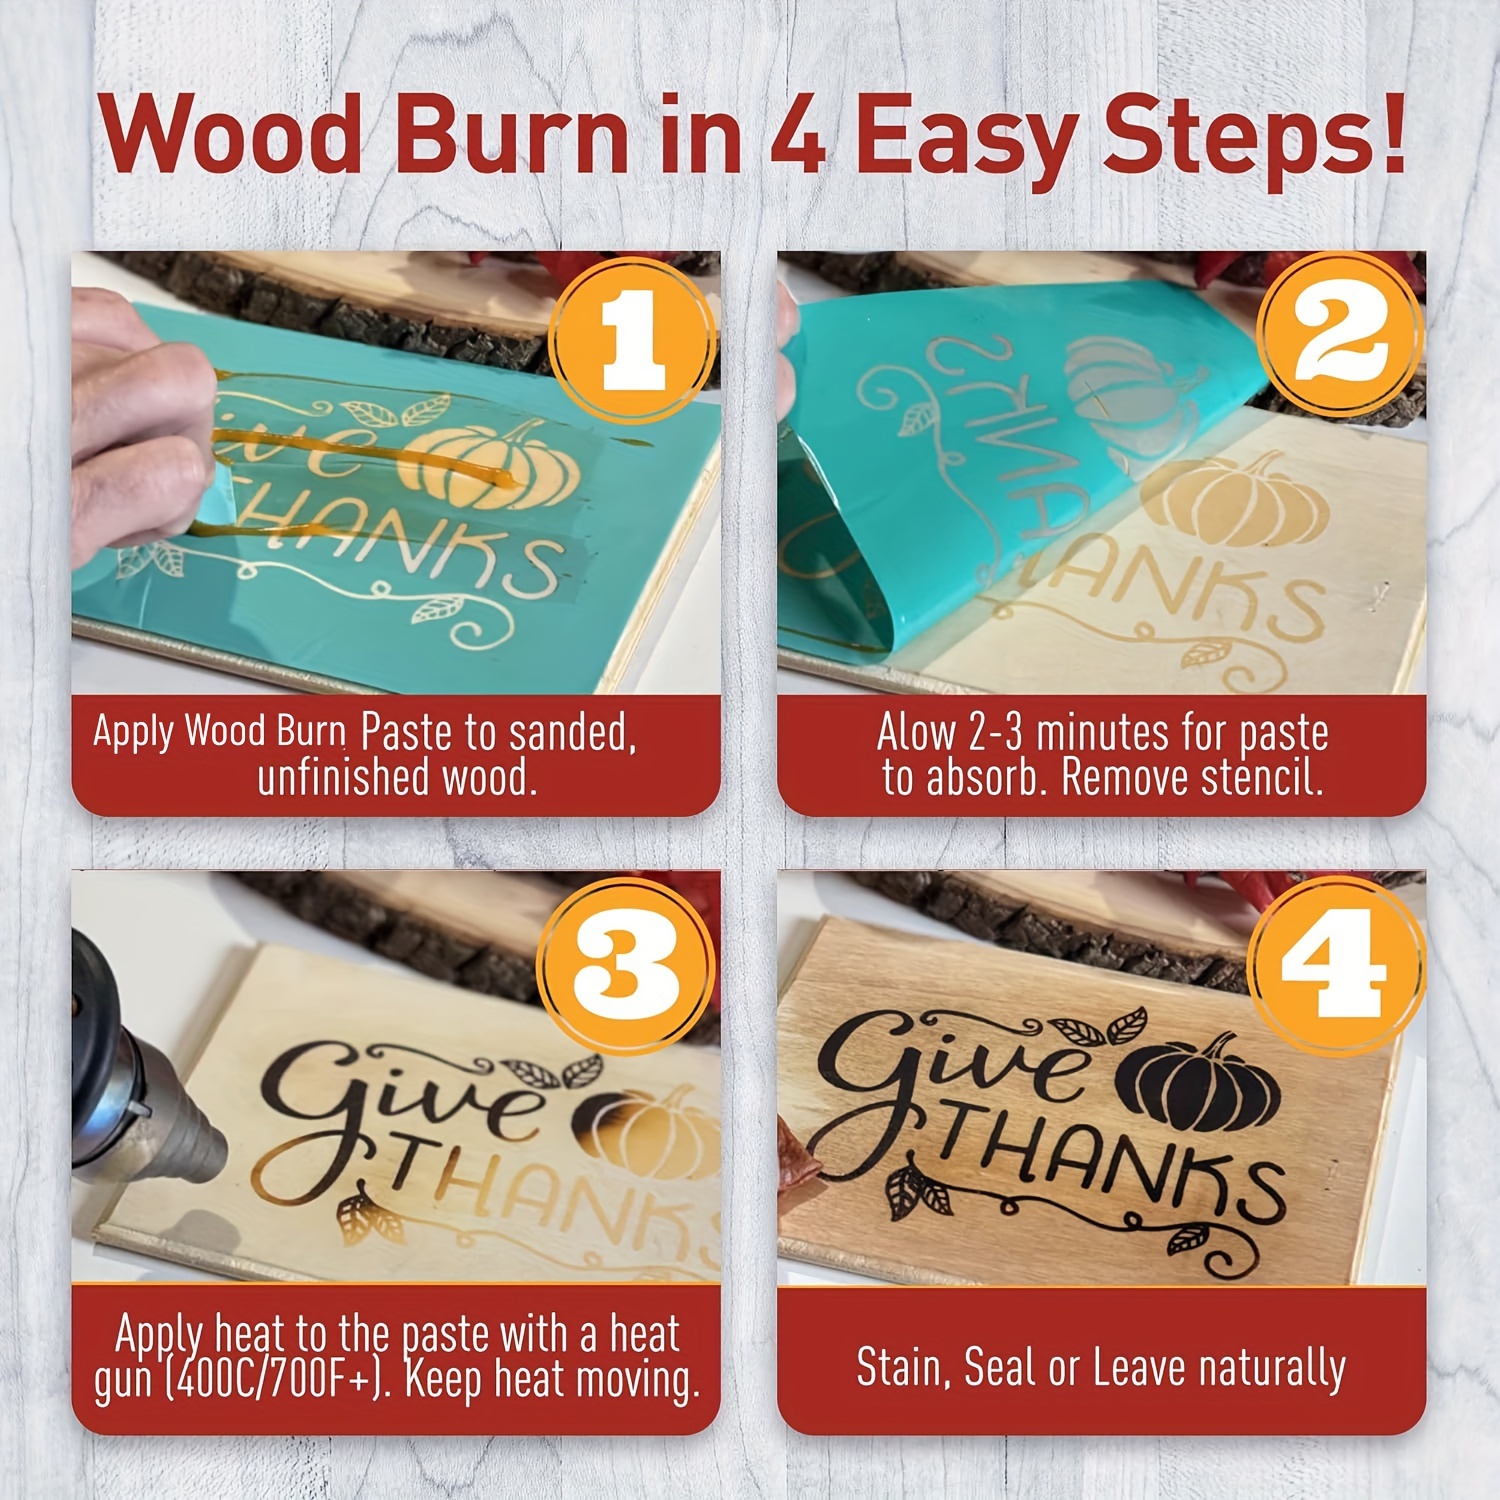 Scorch Paste - Wood Burning Paste, Wood Burning Gel for Crafting & Stencil, Stable Heat Activated Paste, Accurately & Easily Burn Designs on Wood, Can